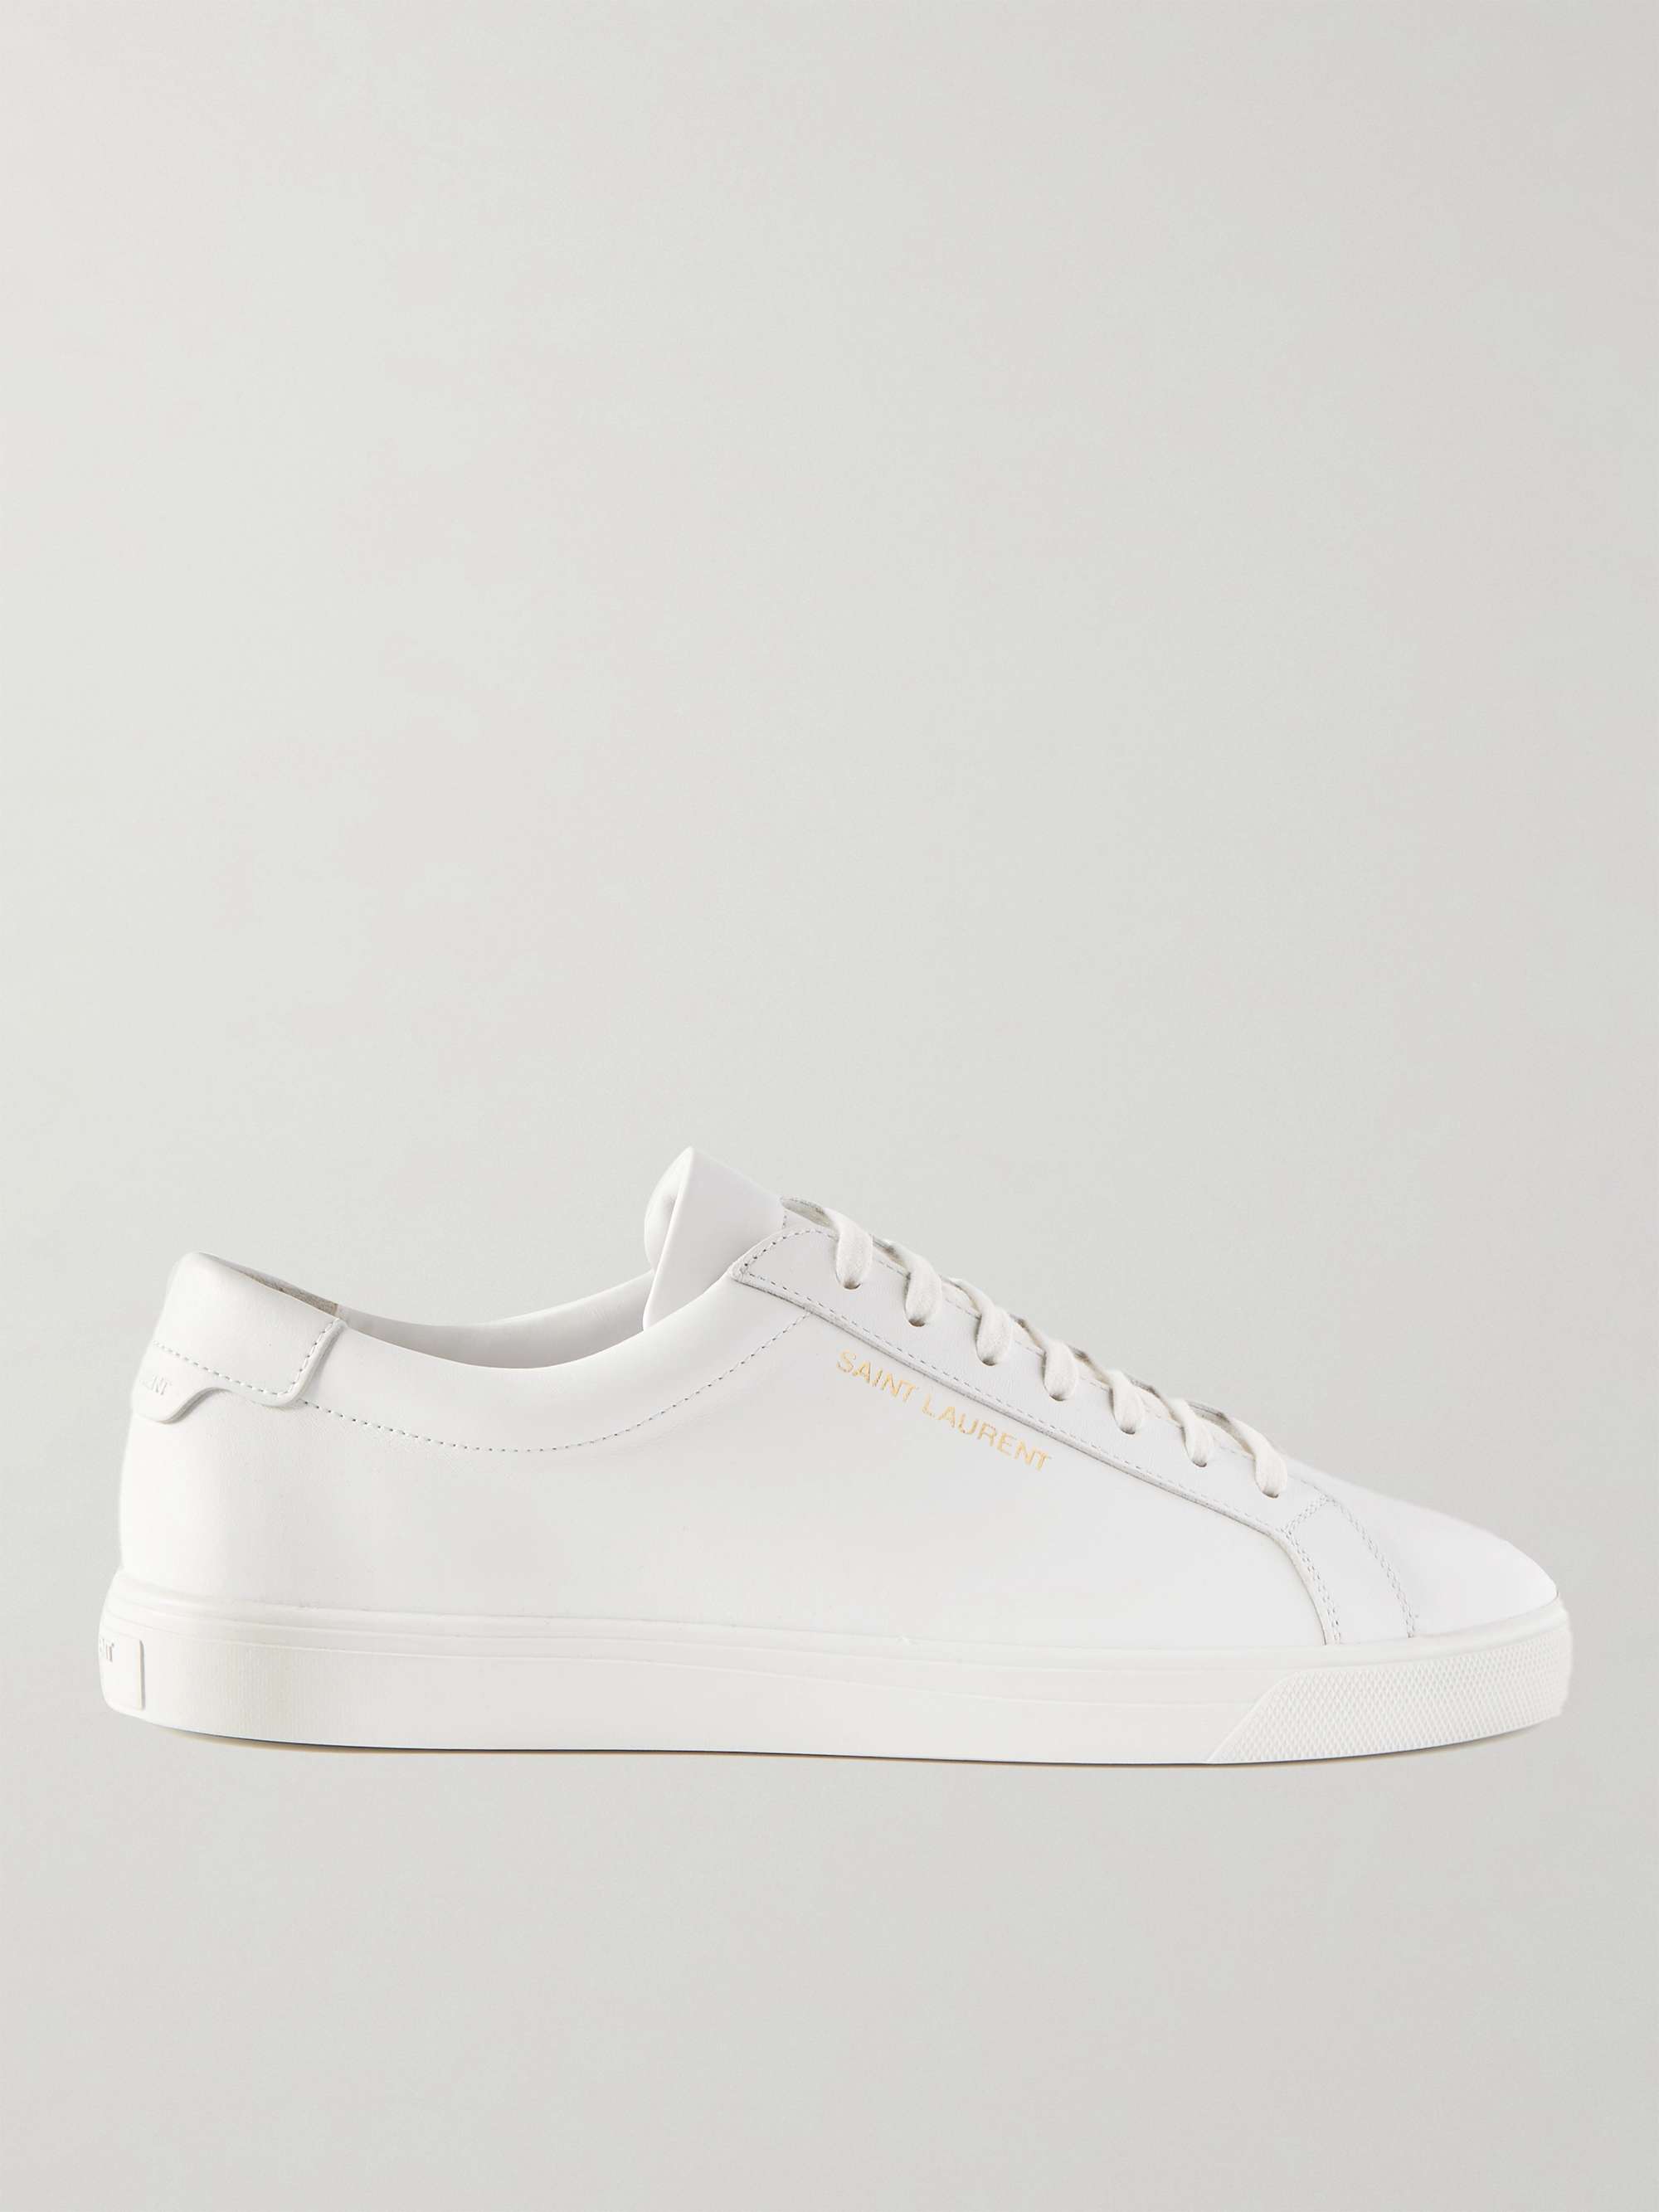 SAINT LAURENT Andy Leather Sneakers | MR PORTER